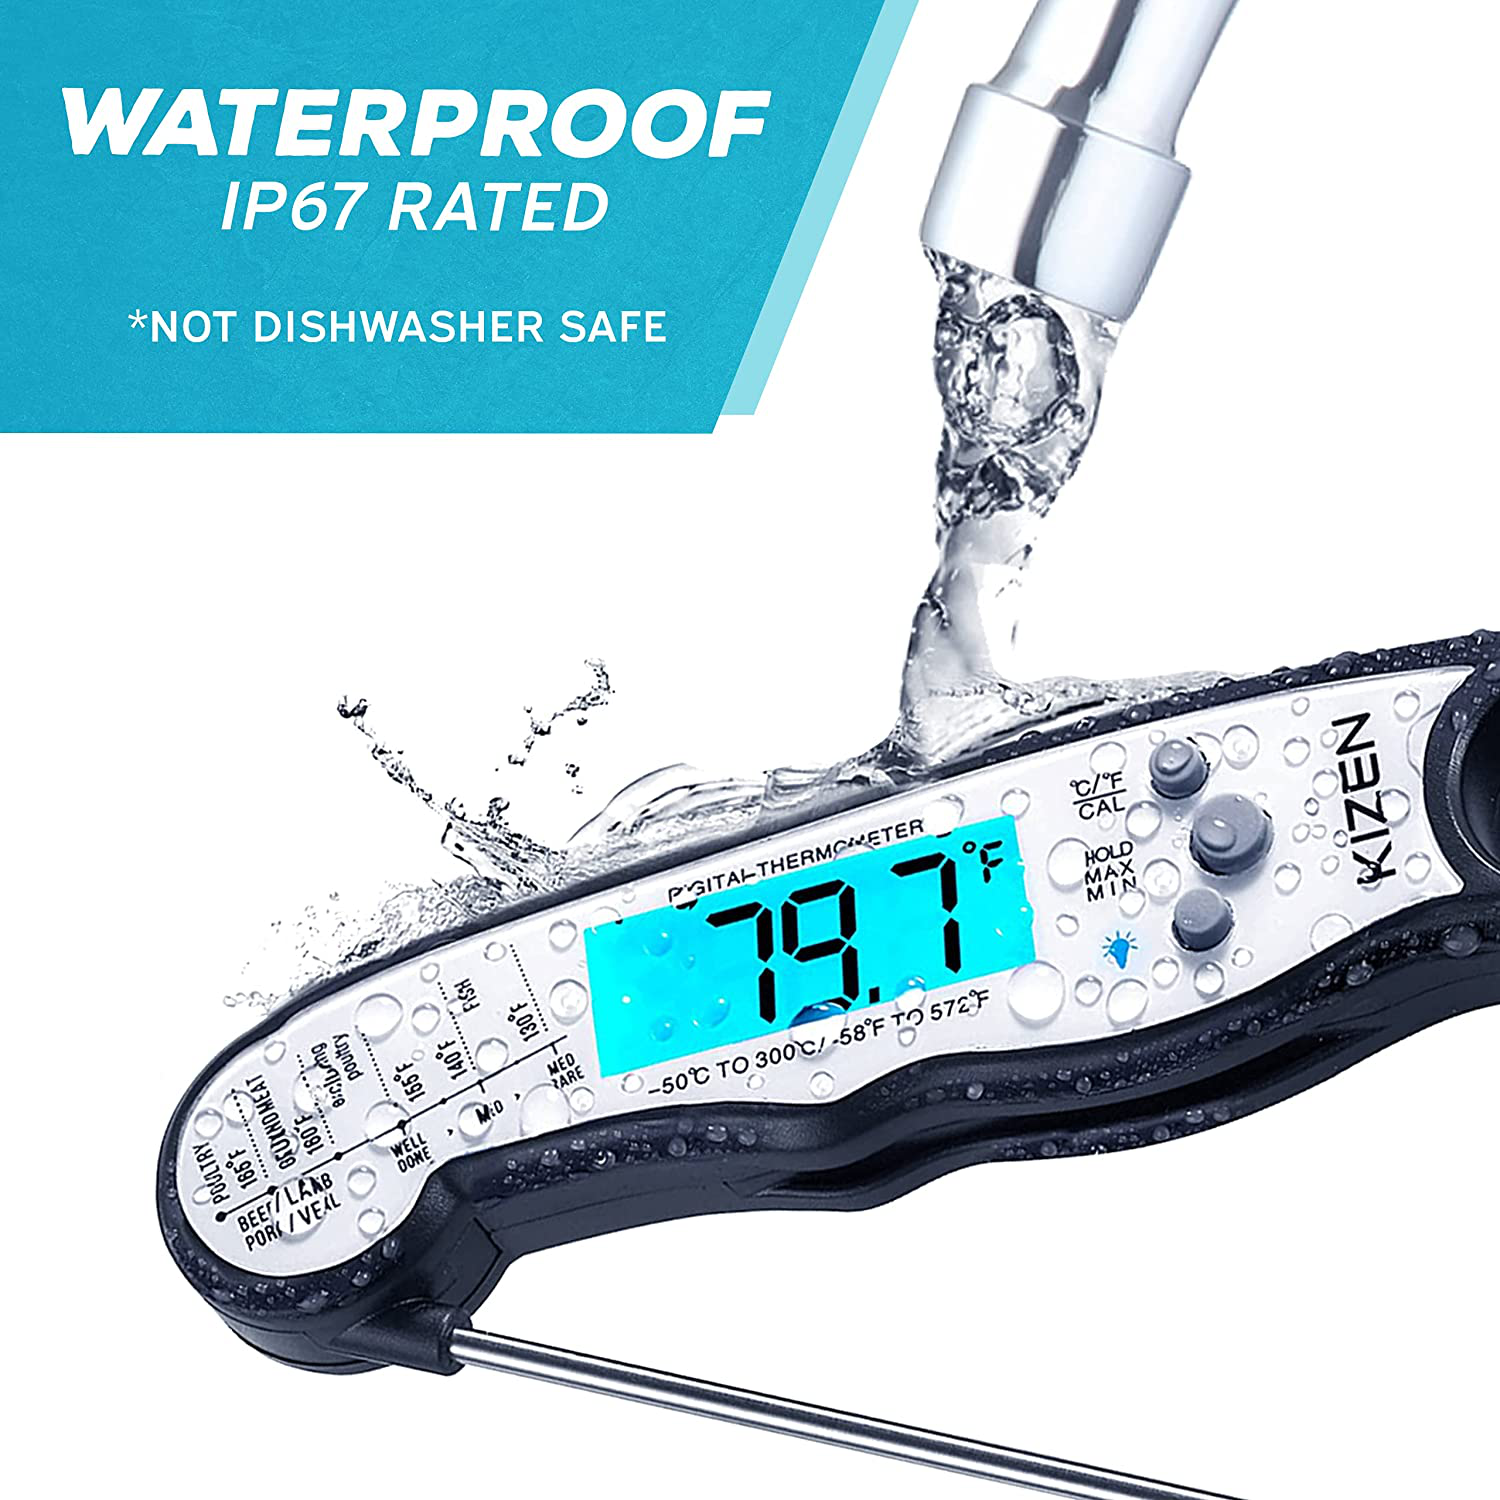 Kizen Digital Meat Thermometers for Cooking - Waterproof Instant Read Food Thermometer for Meat, Deep Frying, Baking, Outdoor Cooking, Grilling, & BBQ